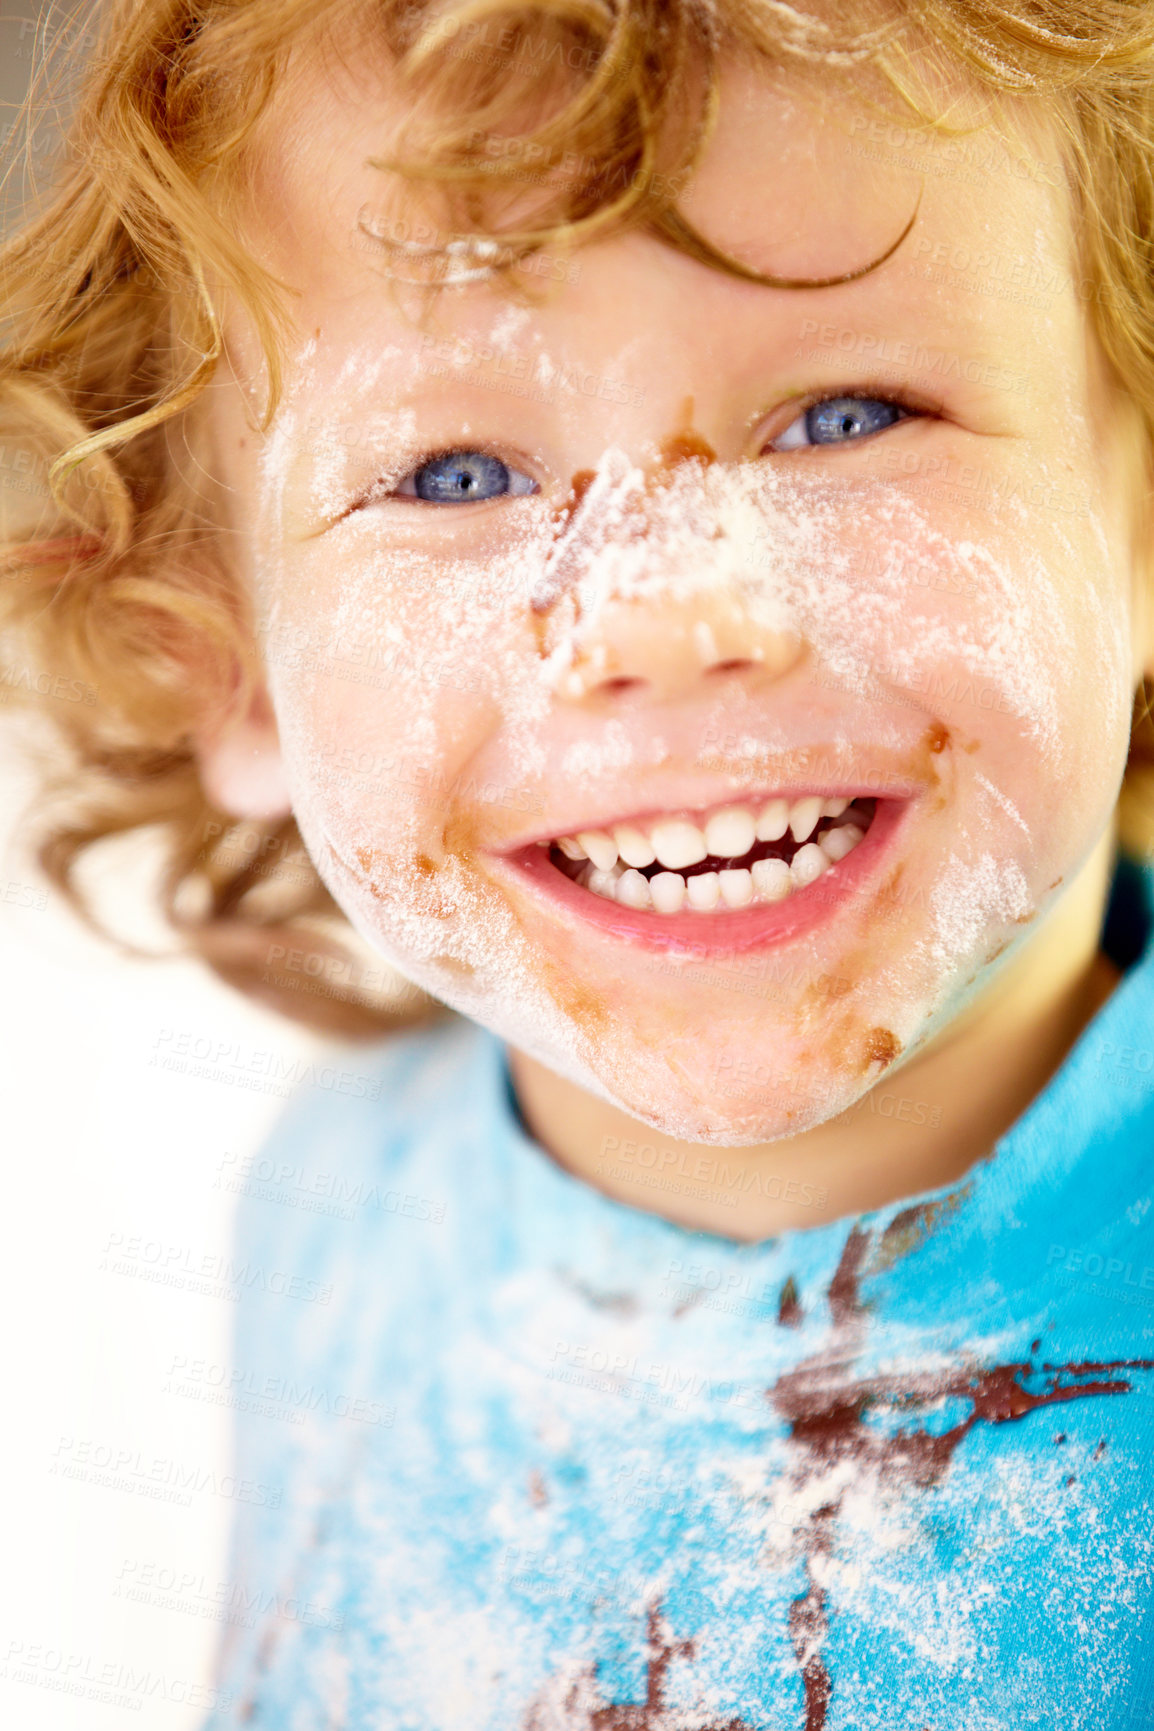 Buy stock photo Portrait, mess and flour with a boy in the kitchen of his home, learning how to cook for child development. Children, bake and a happy young kid looking naughty with food ingredients on his face